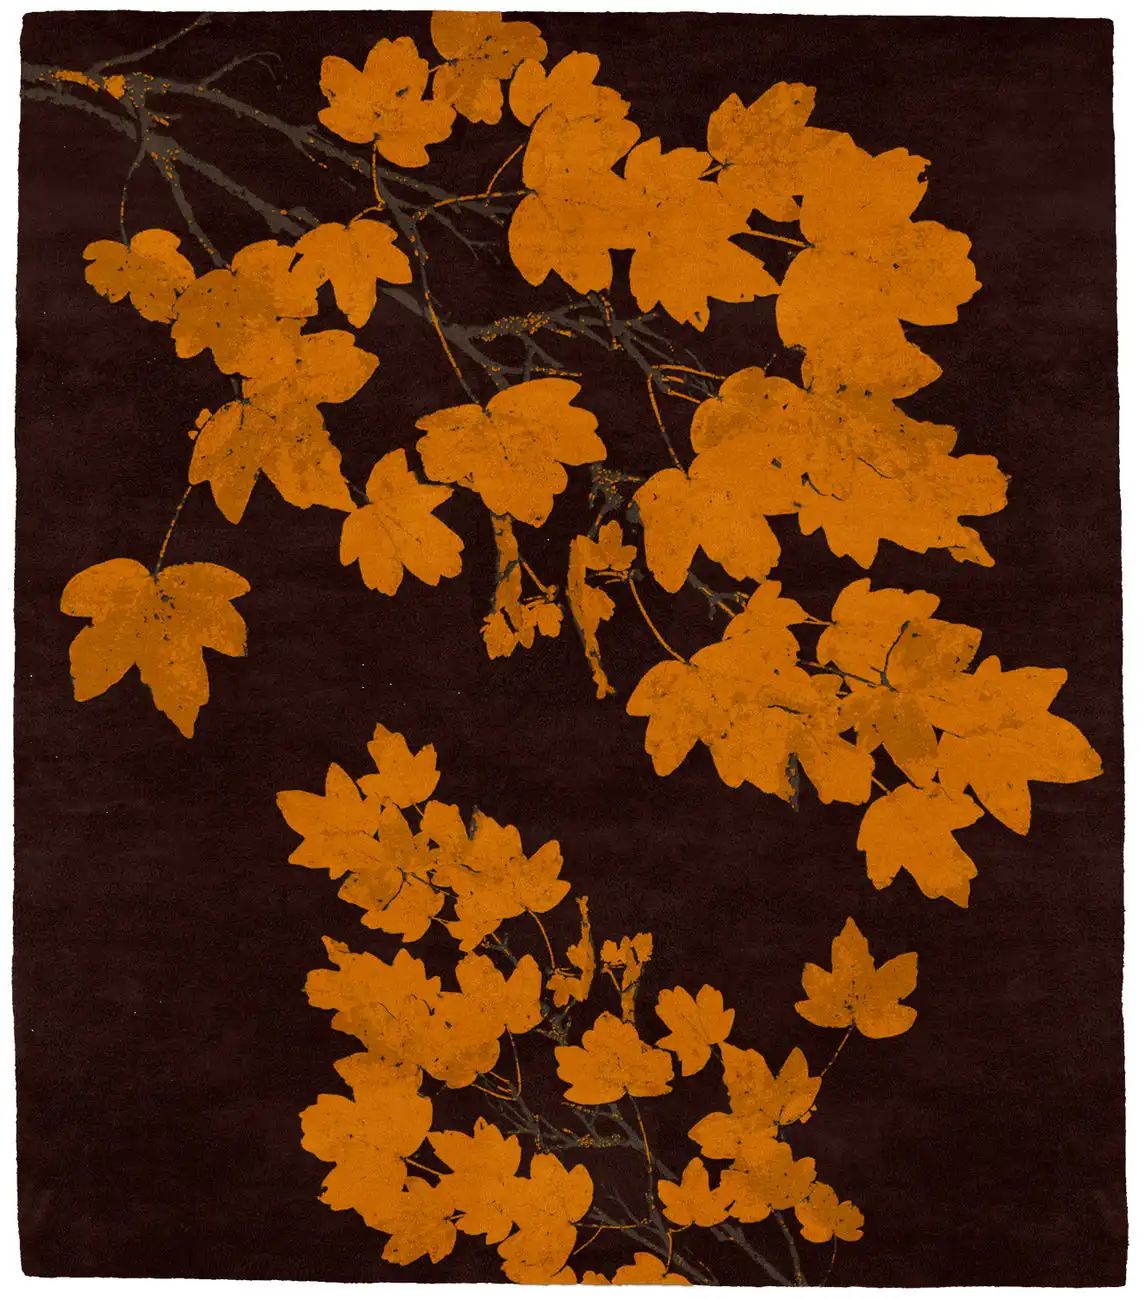 Autumn Pumpkin Rug from the Signature Designer Rugs collection at